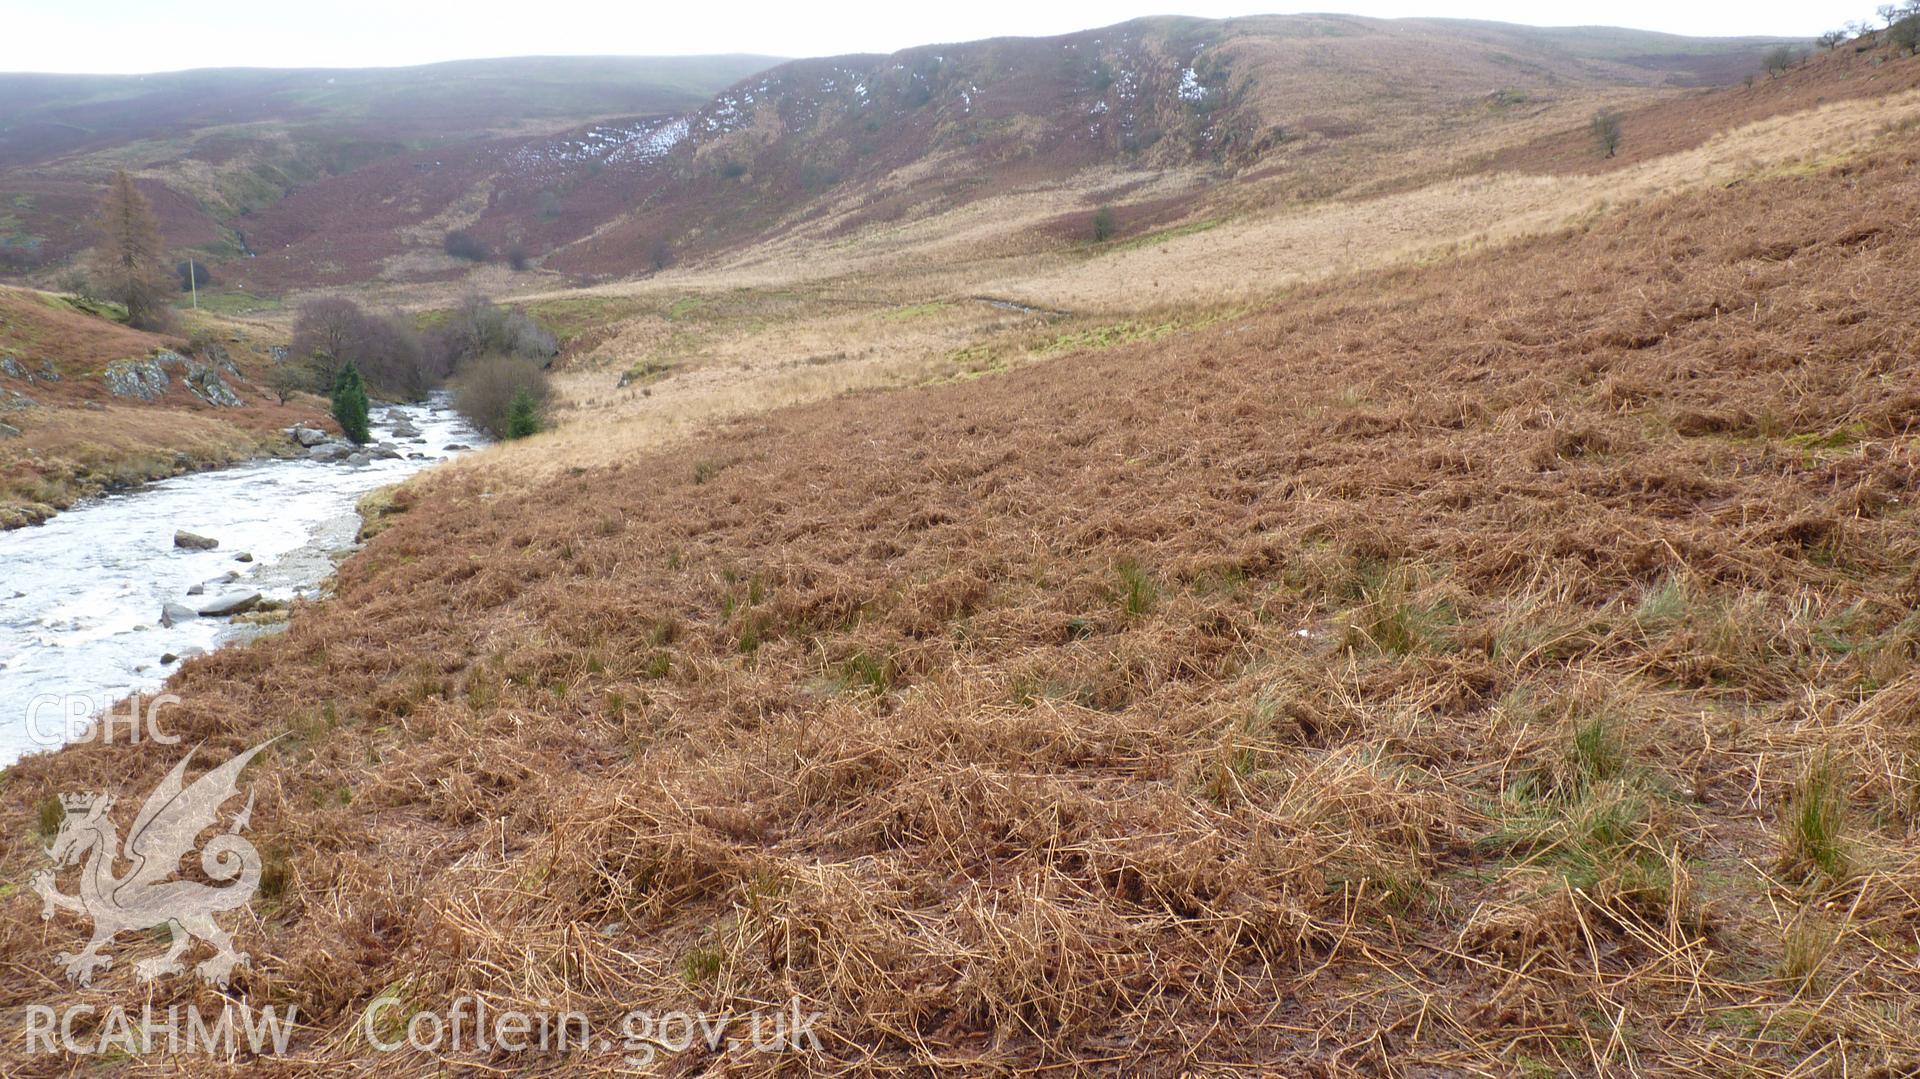 General view along penstock route, running up centre of picture, across an area of numerous banks (not visible amongst bracken). Photographed for Archaeological Desk Based Assessment of Afon Claerwen, Elan Valley, Rhayader. Assessment by Archaeology Wales, 2017-18.